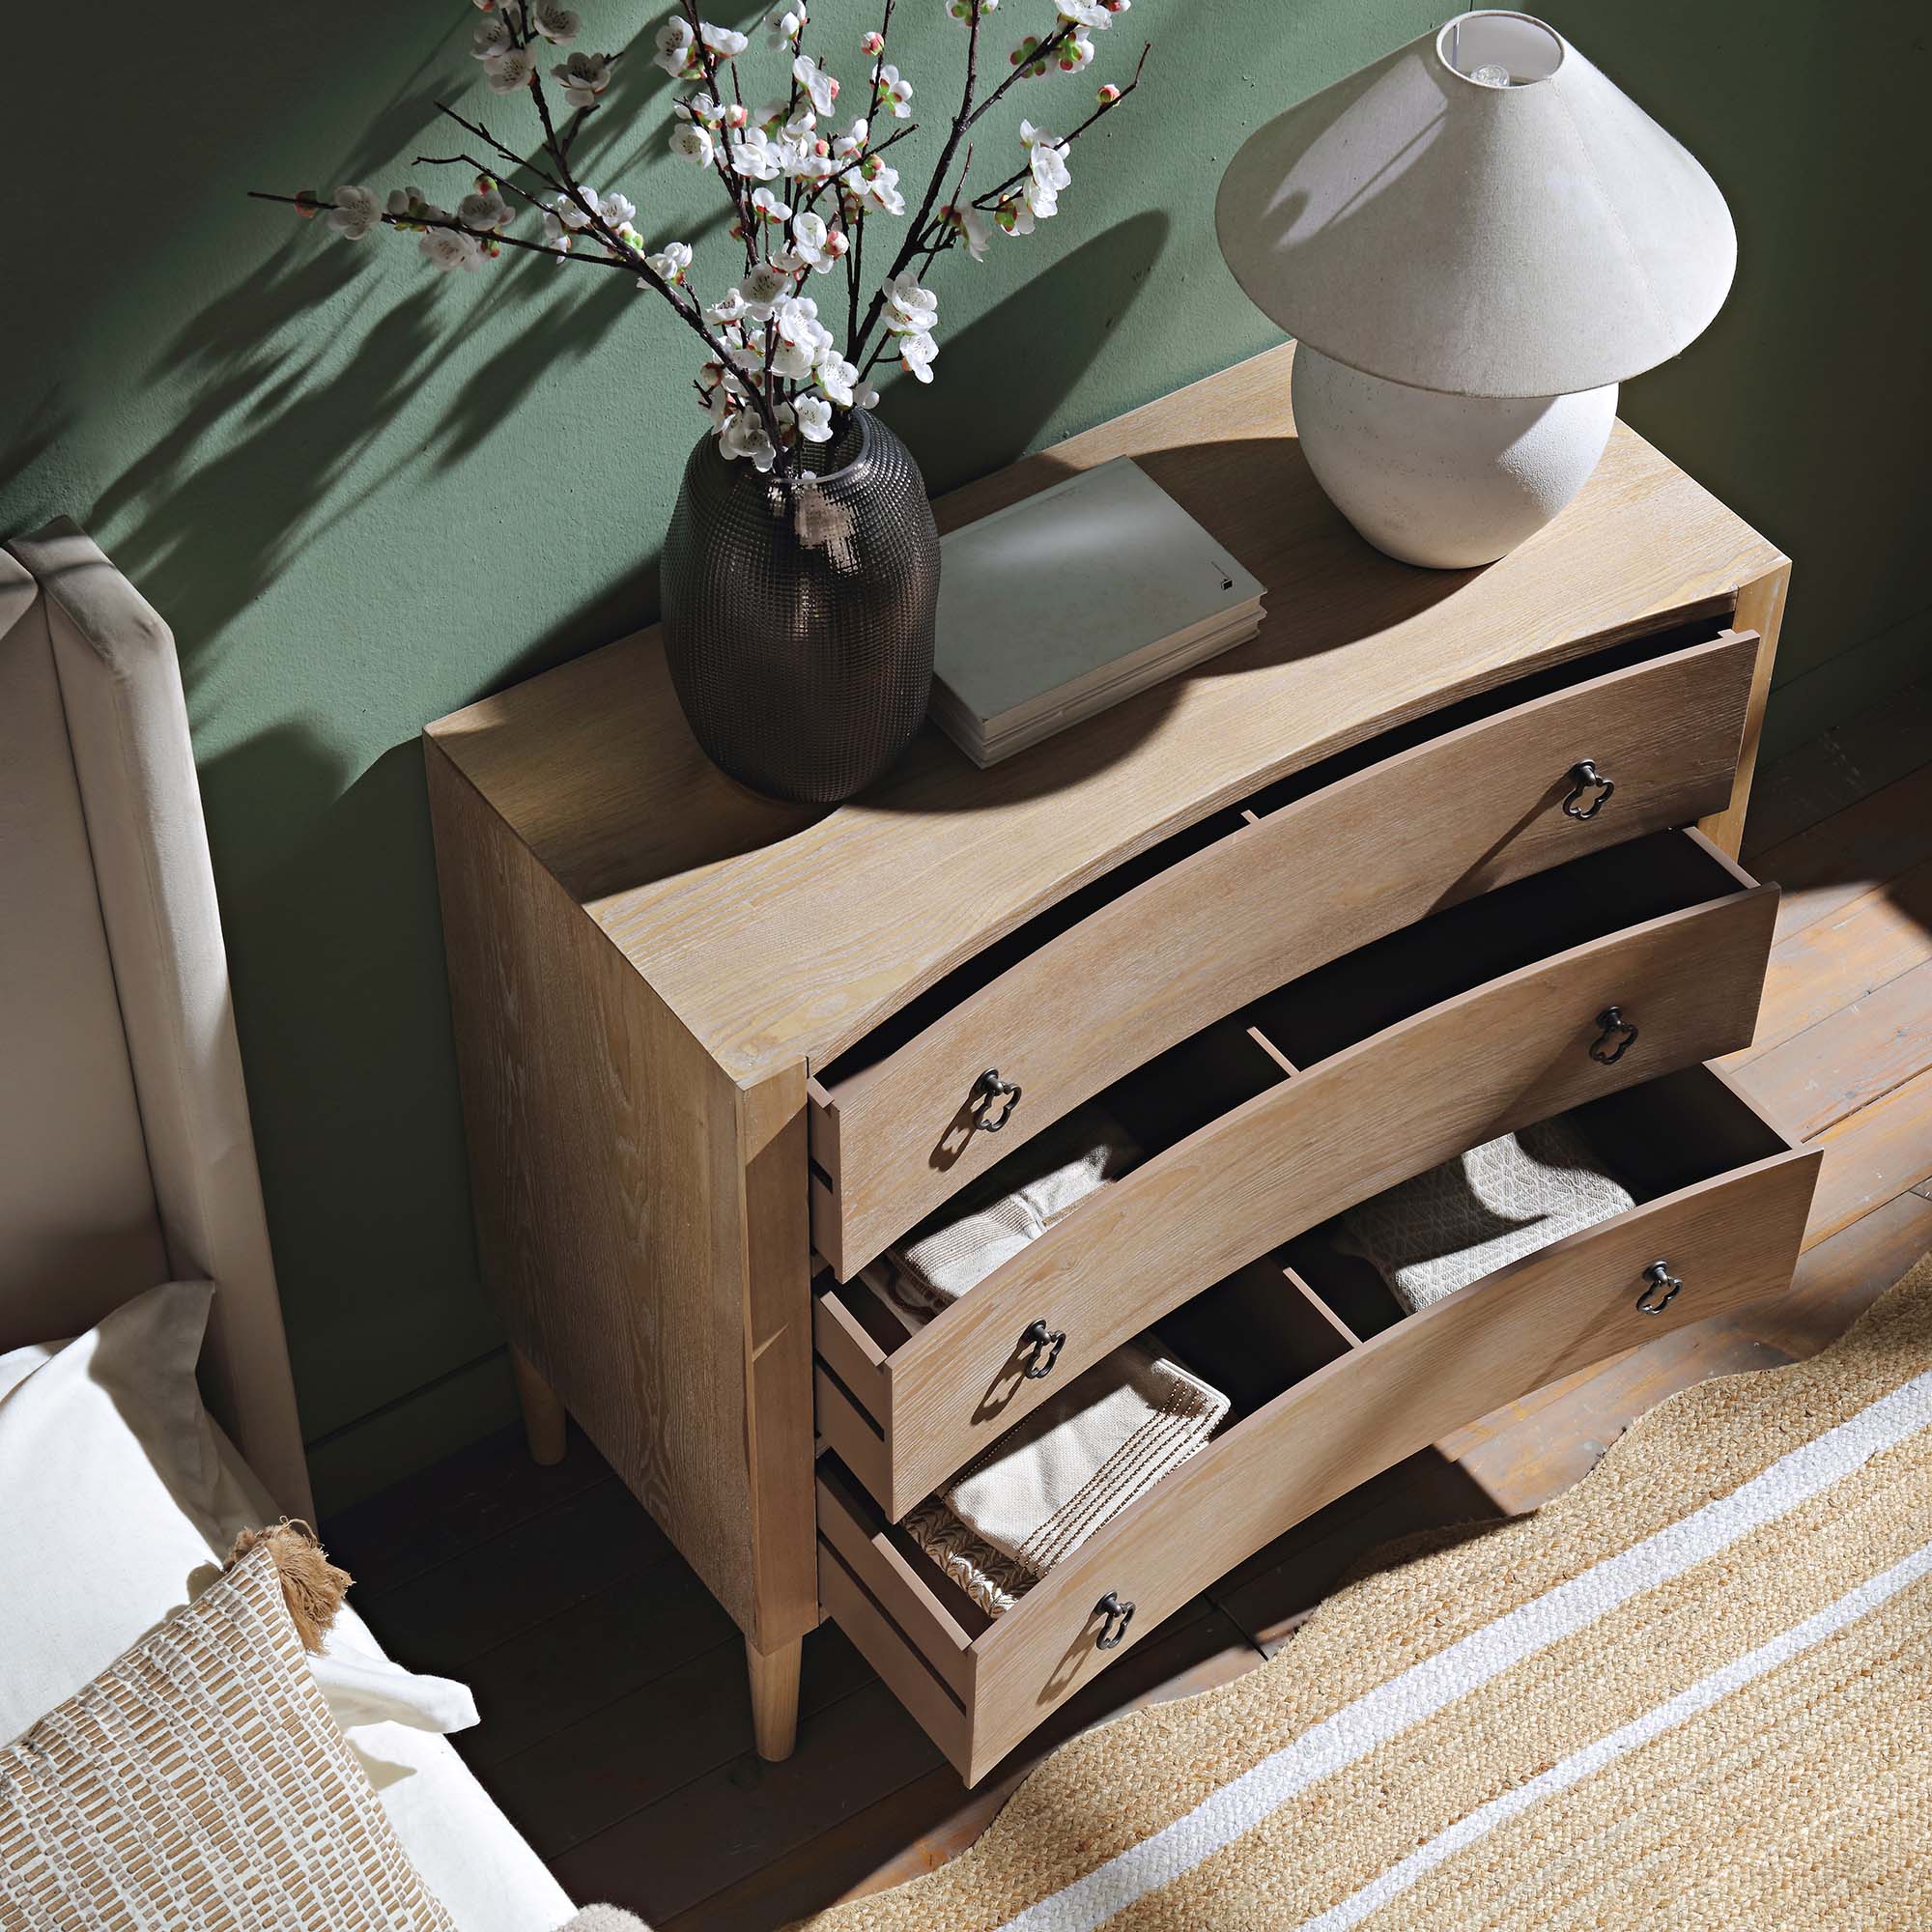 Thalia Concave Chest of Drawers, Natural